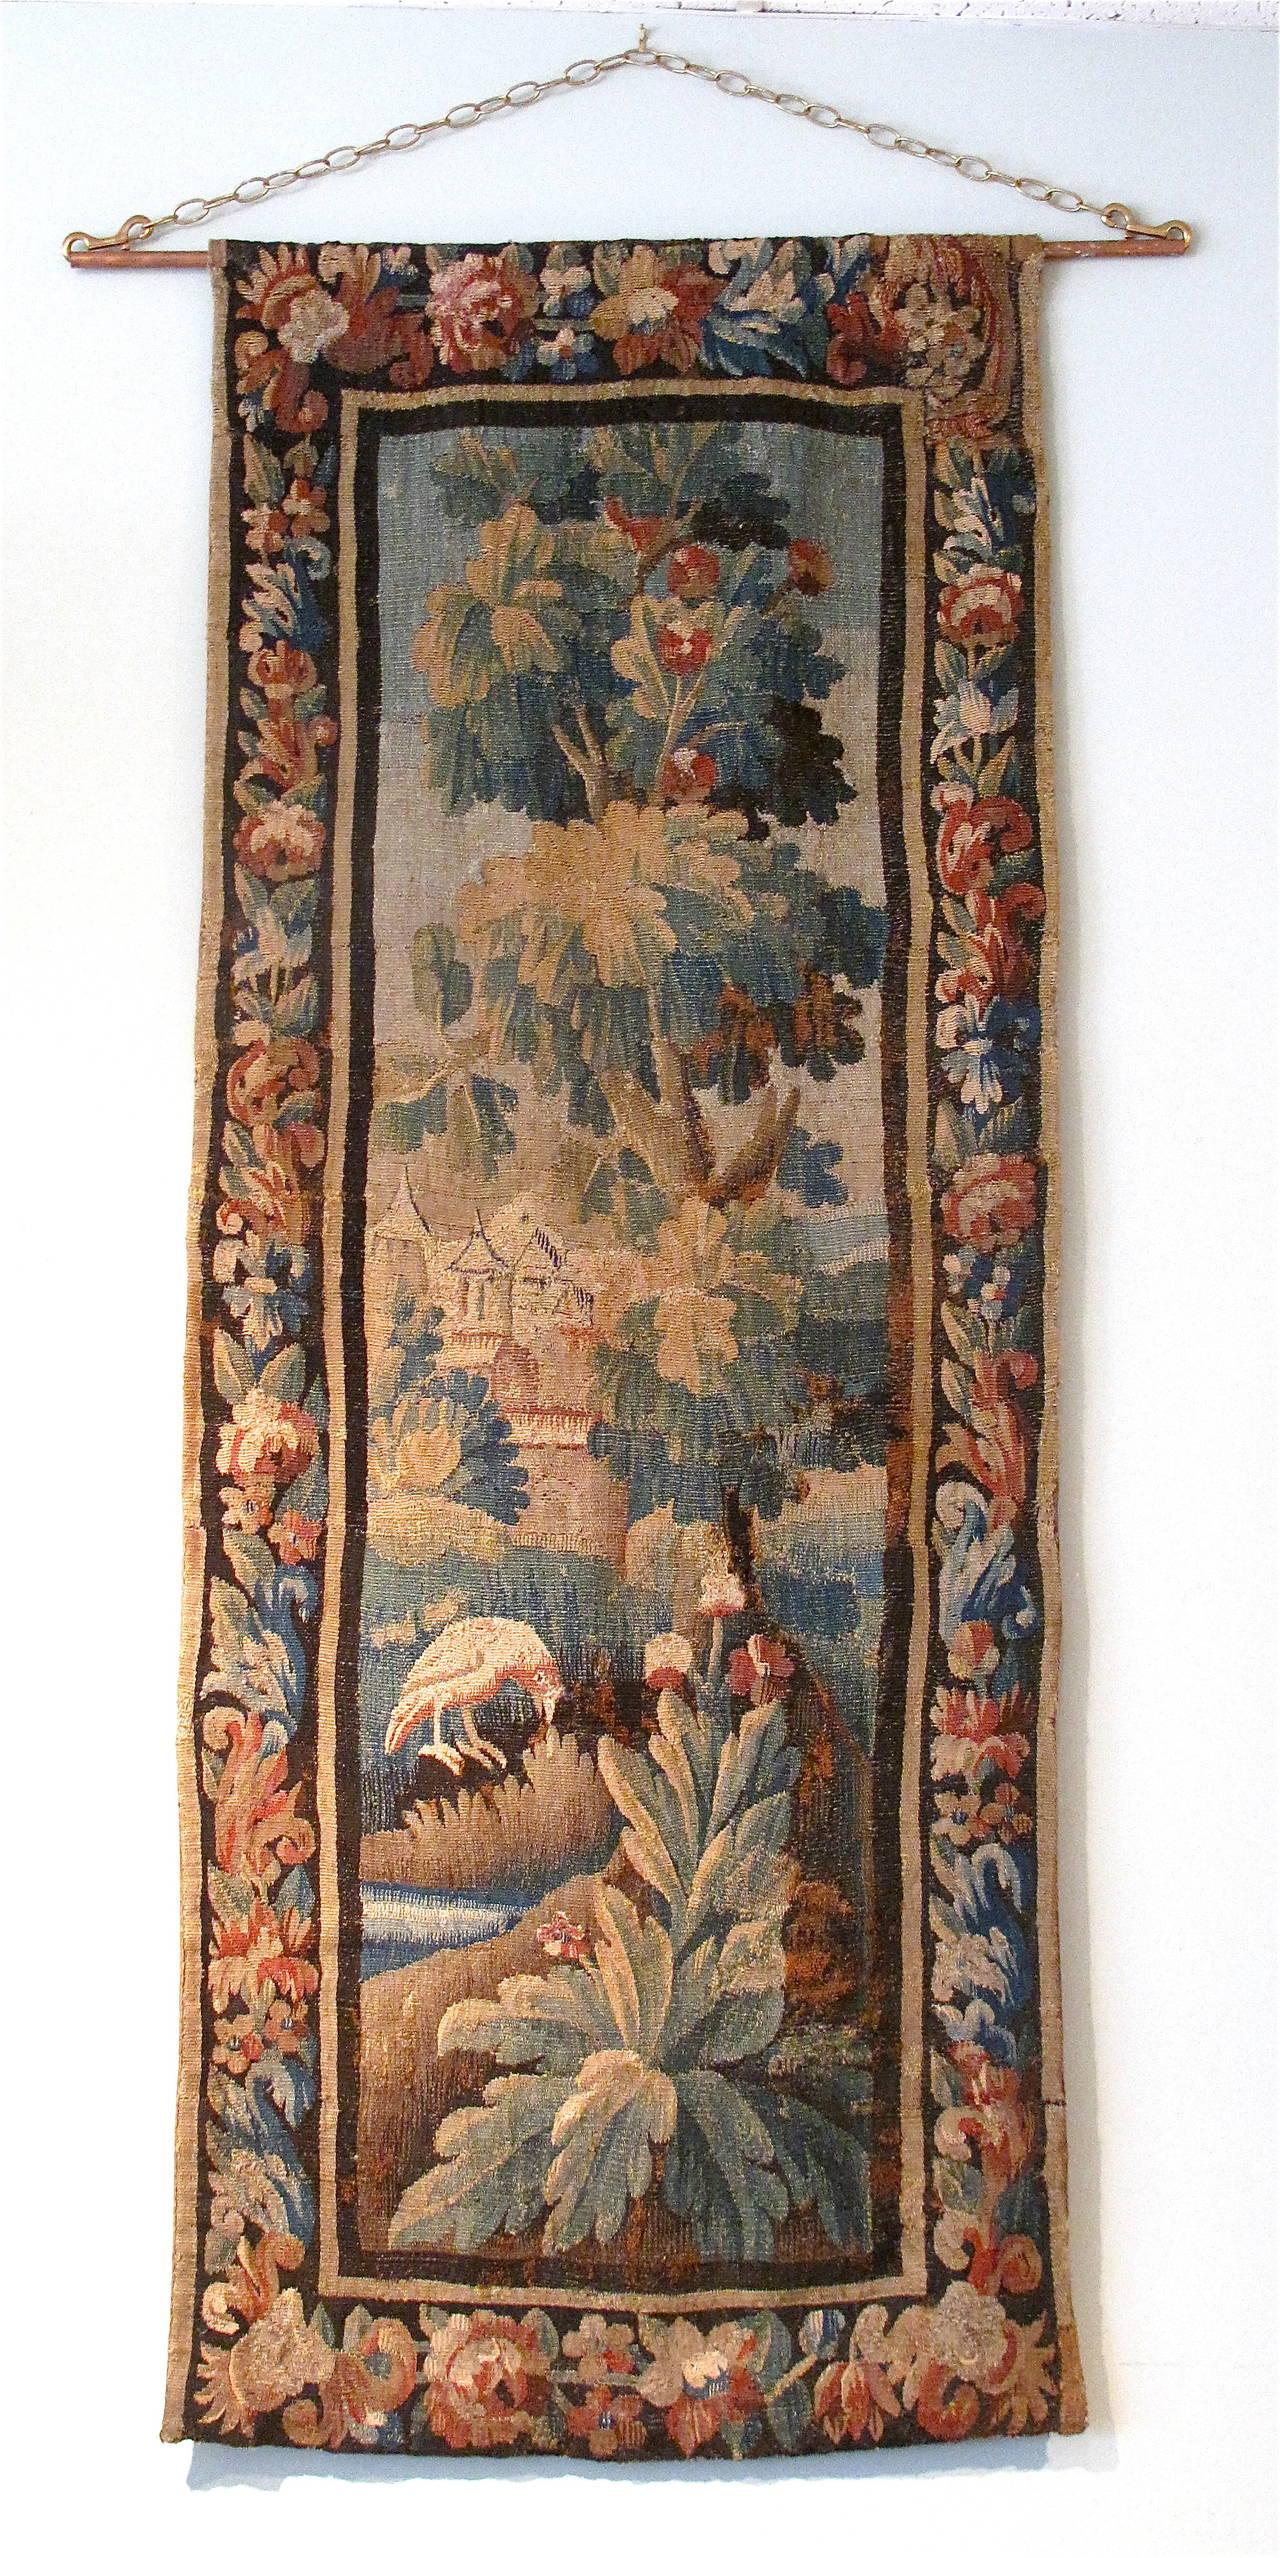 A scenic landscape tapestry featuring a distant castle amid boldly depicted trees and foliage, with a bird in the foreground. The original borders encircle the scene. Rustic and charming aspect to the whole.